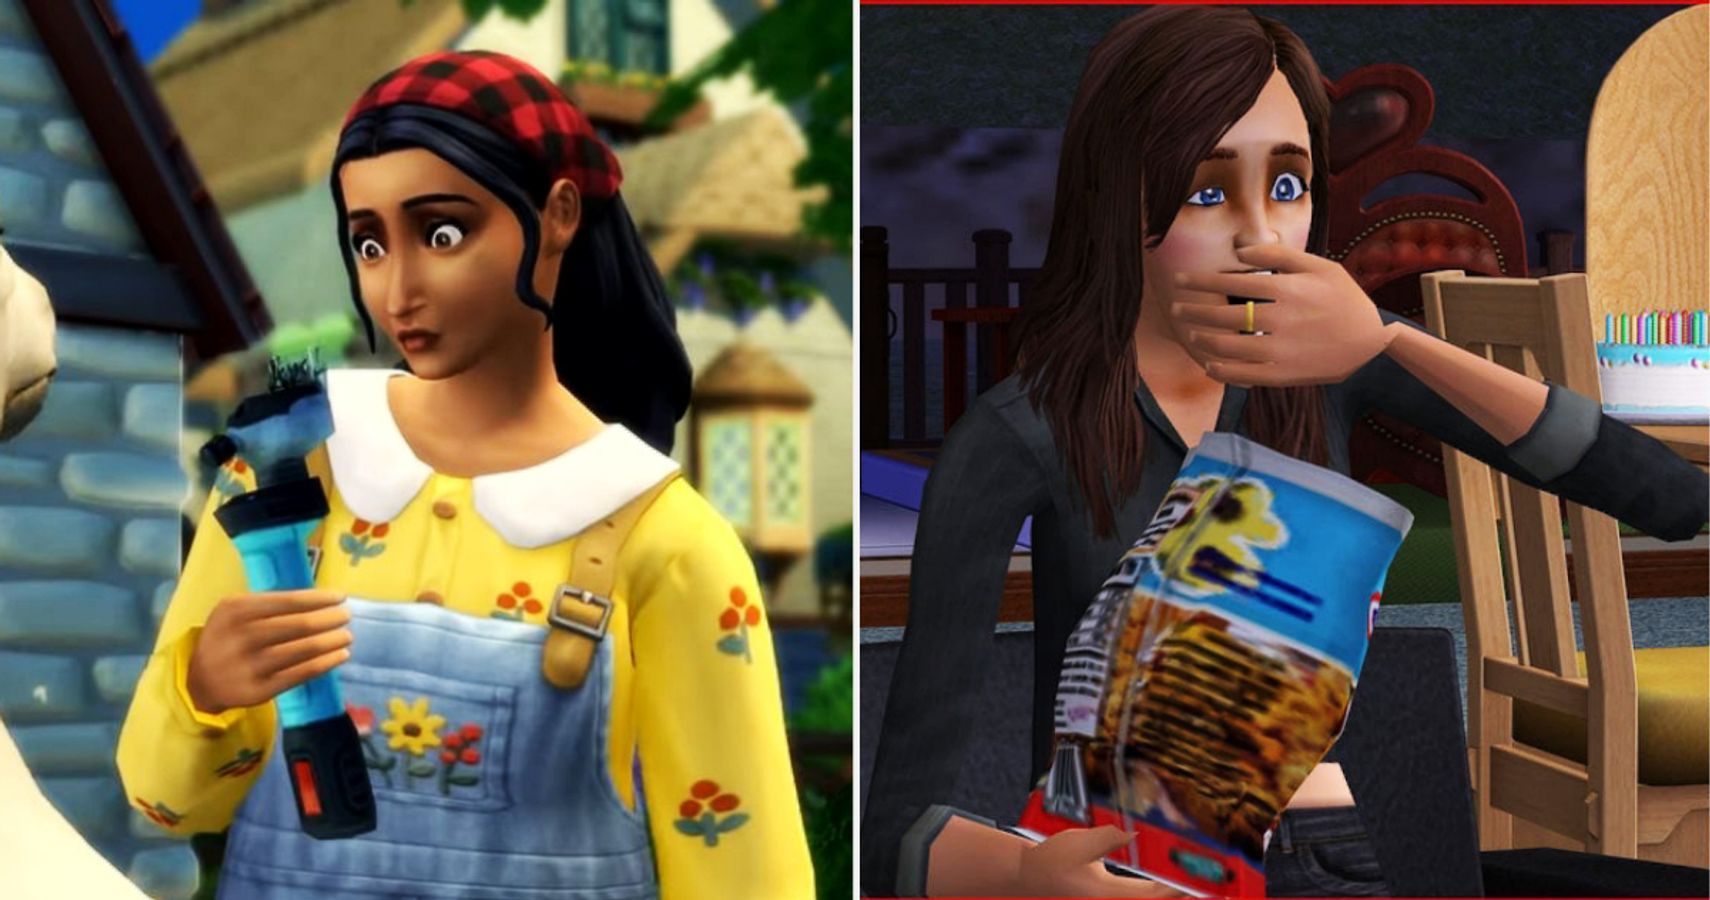 The Sims 4 Cottage Living Character And The Sims 2 Sim Eating Chips